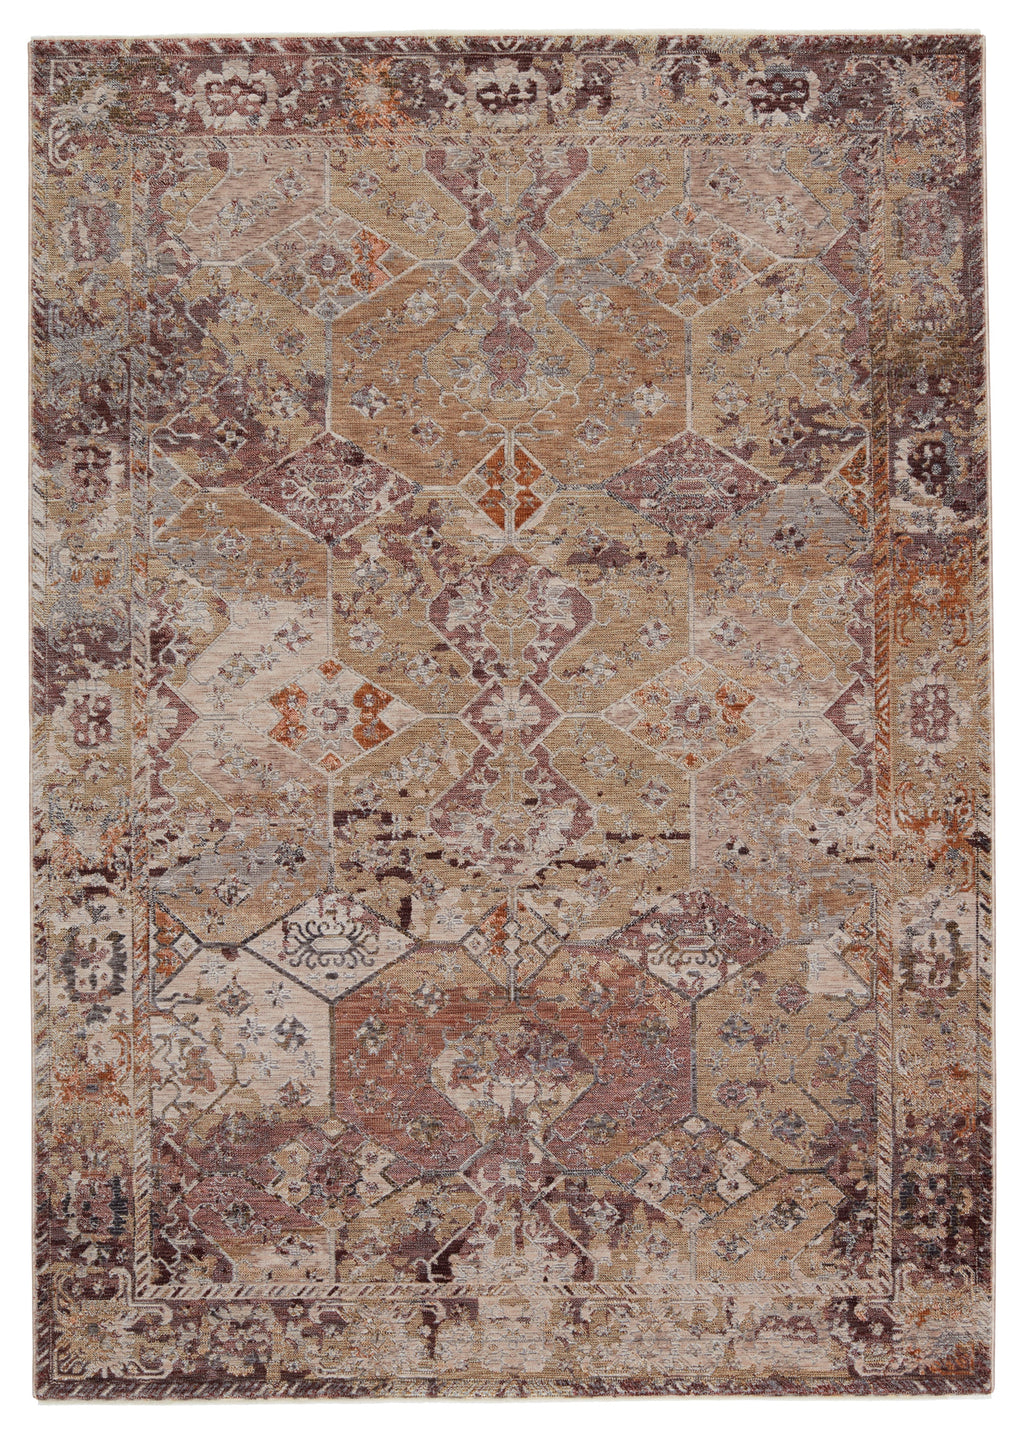 Valentia Thessaly Gold & Maroon Rug 1